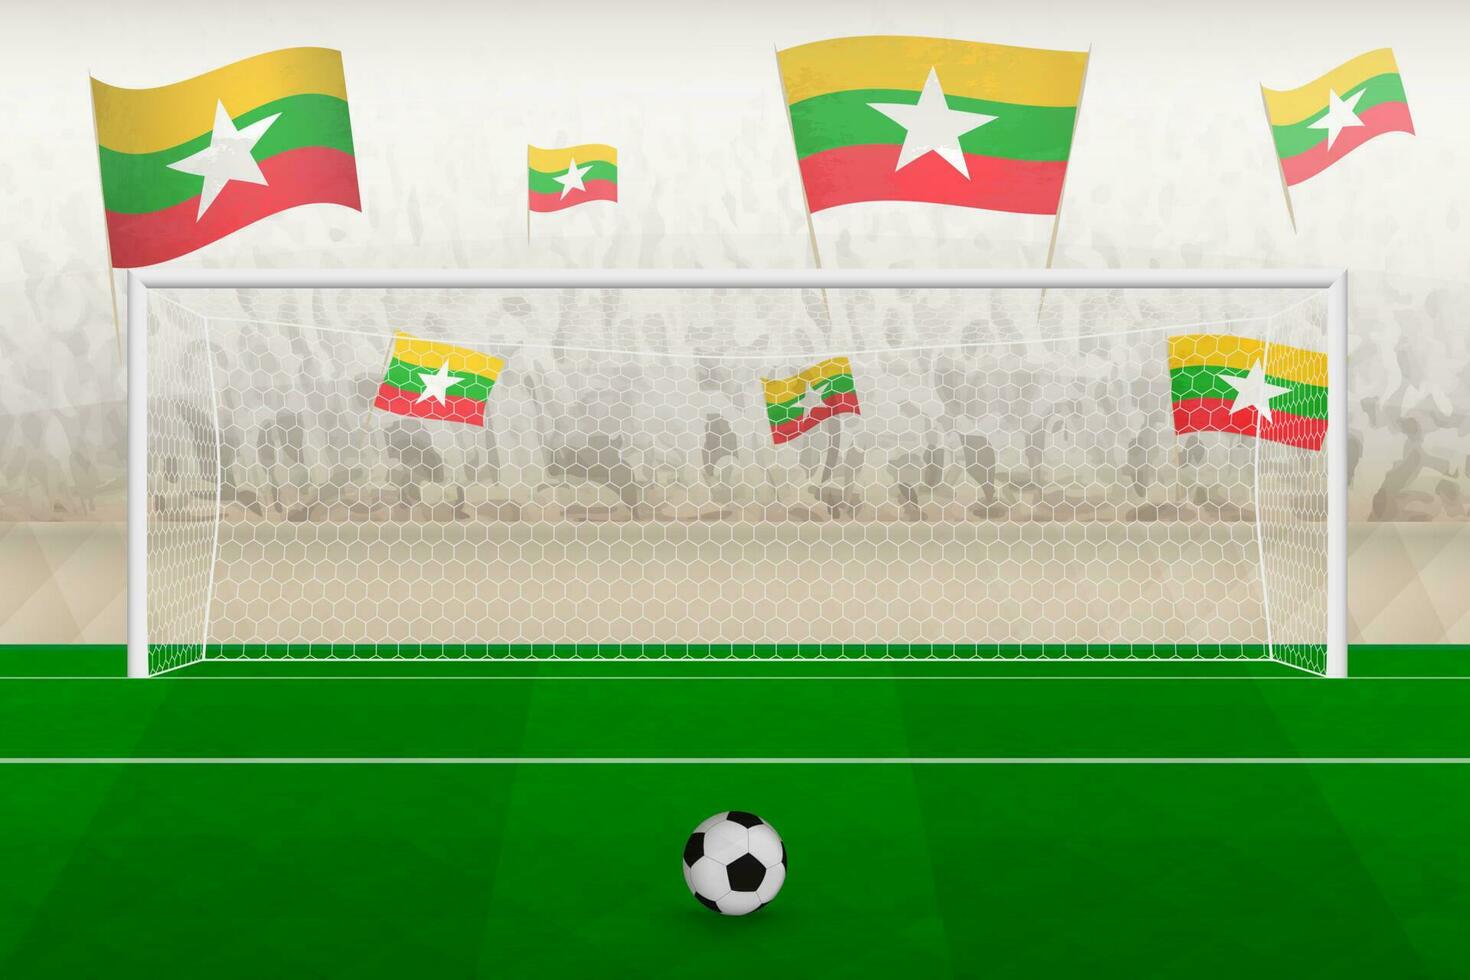 Myanmar football team fans with flags of Myanmar cheering on stadium, penalty kick concept in a soccer match. vector